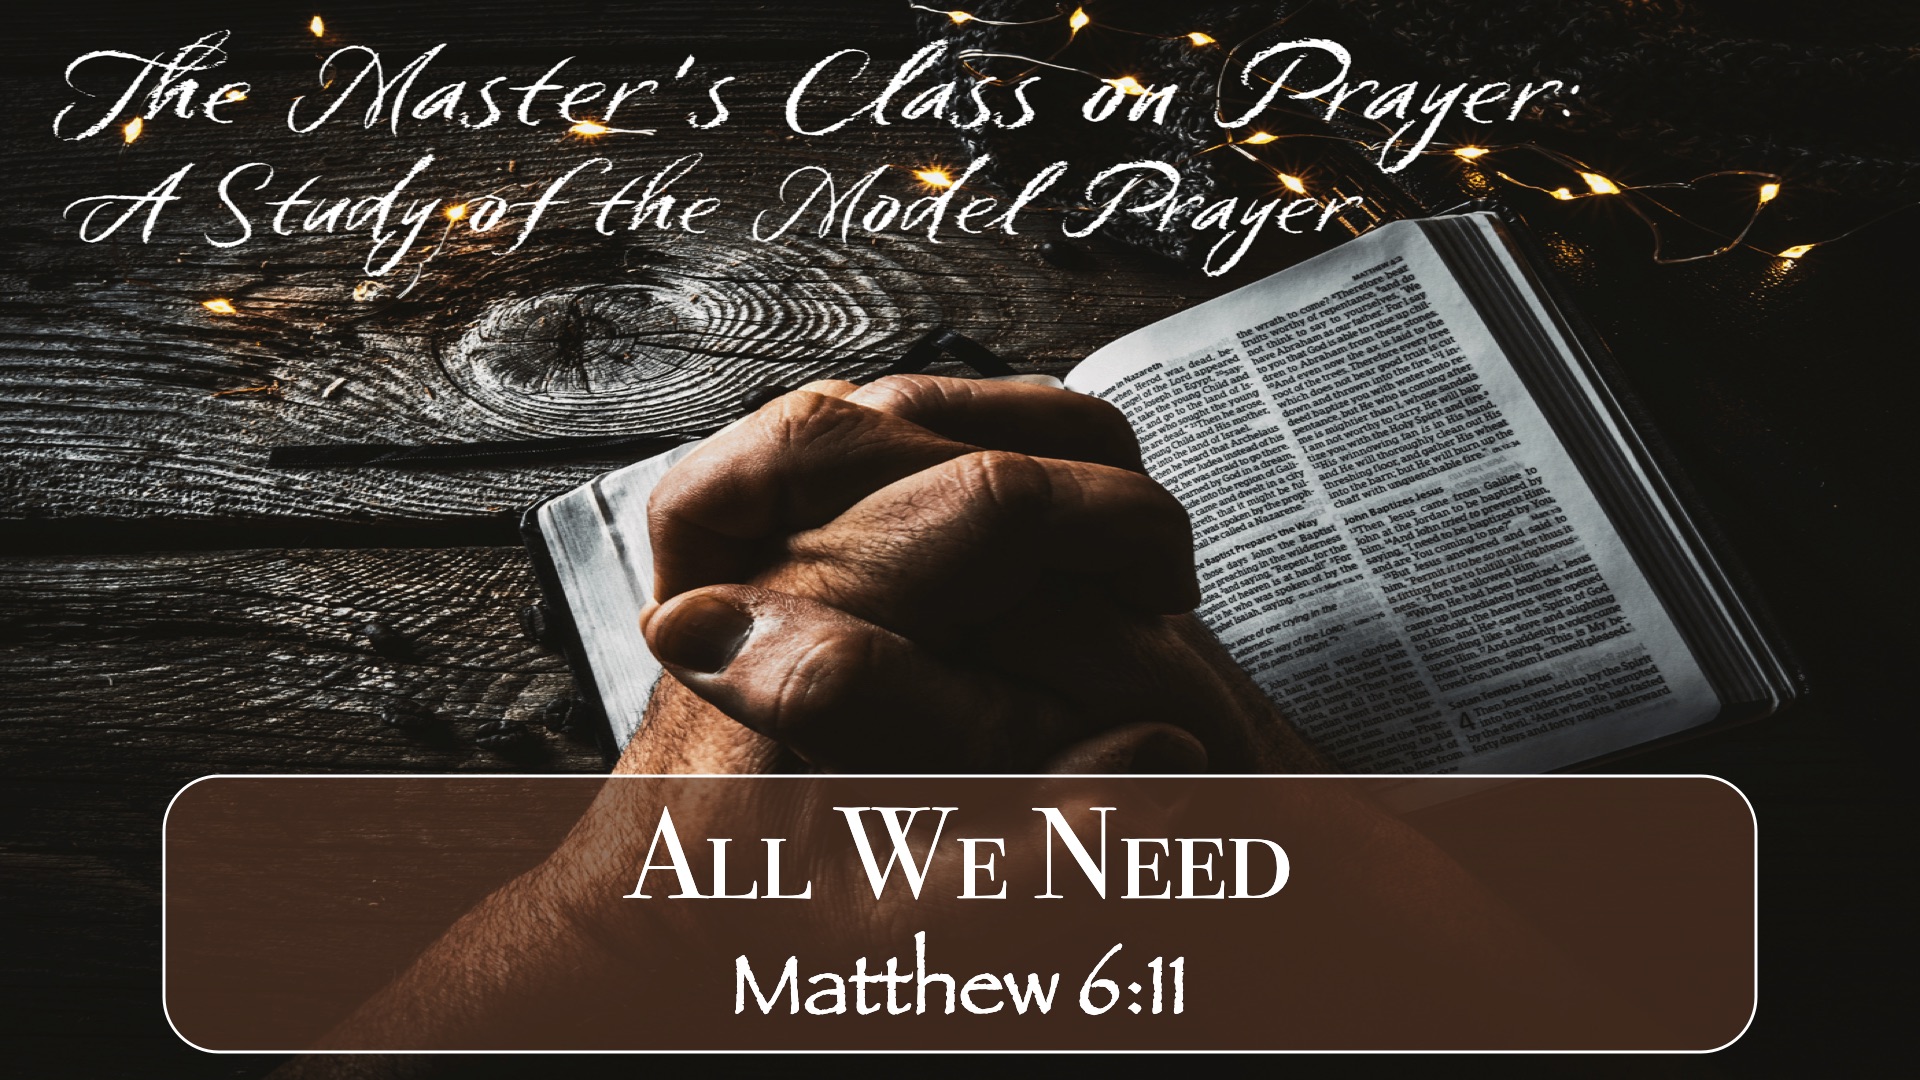 “Master’s Class on Prayer – All We Need”